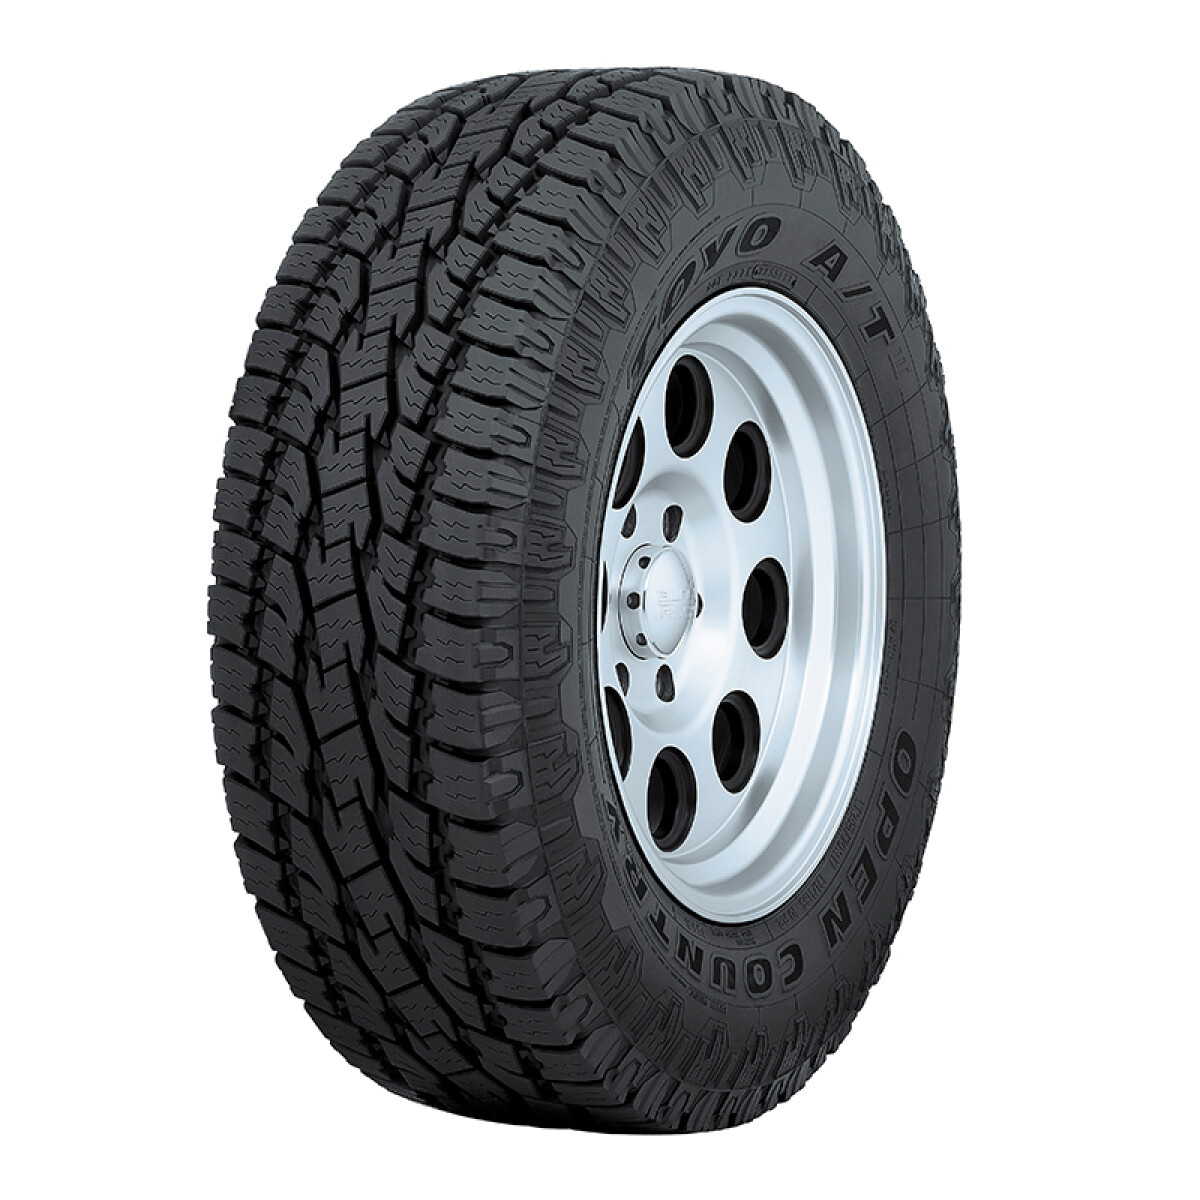 CUBIERTA NEUMATICO TOYO OPEN COUNTRY AT2 LT255/70R16 115S 